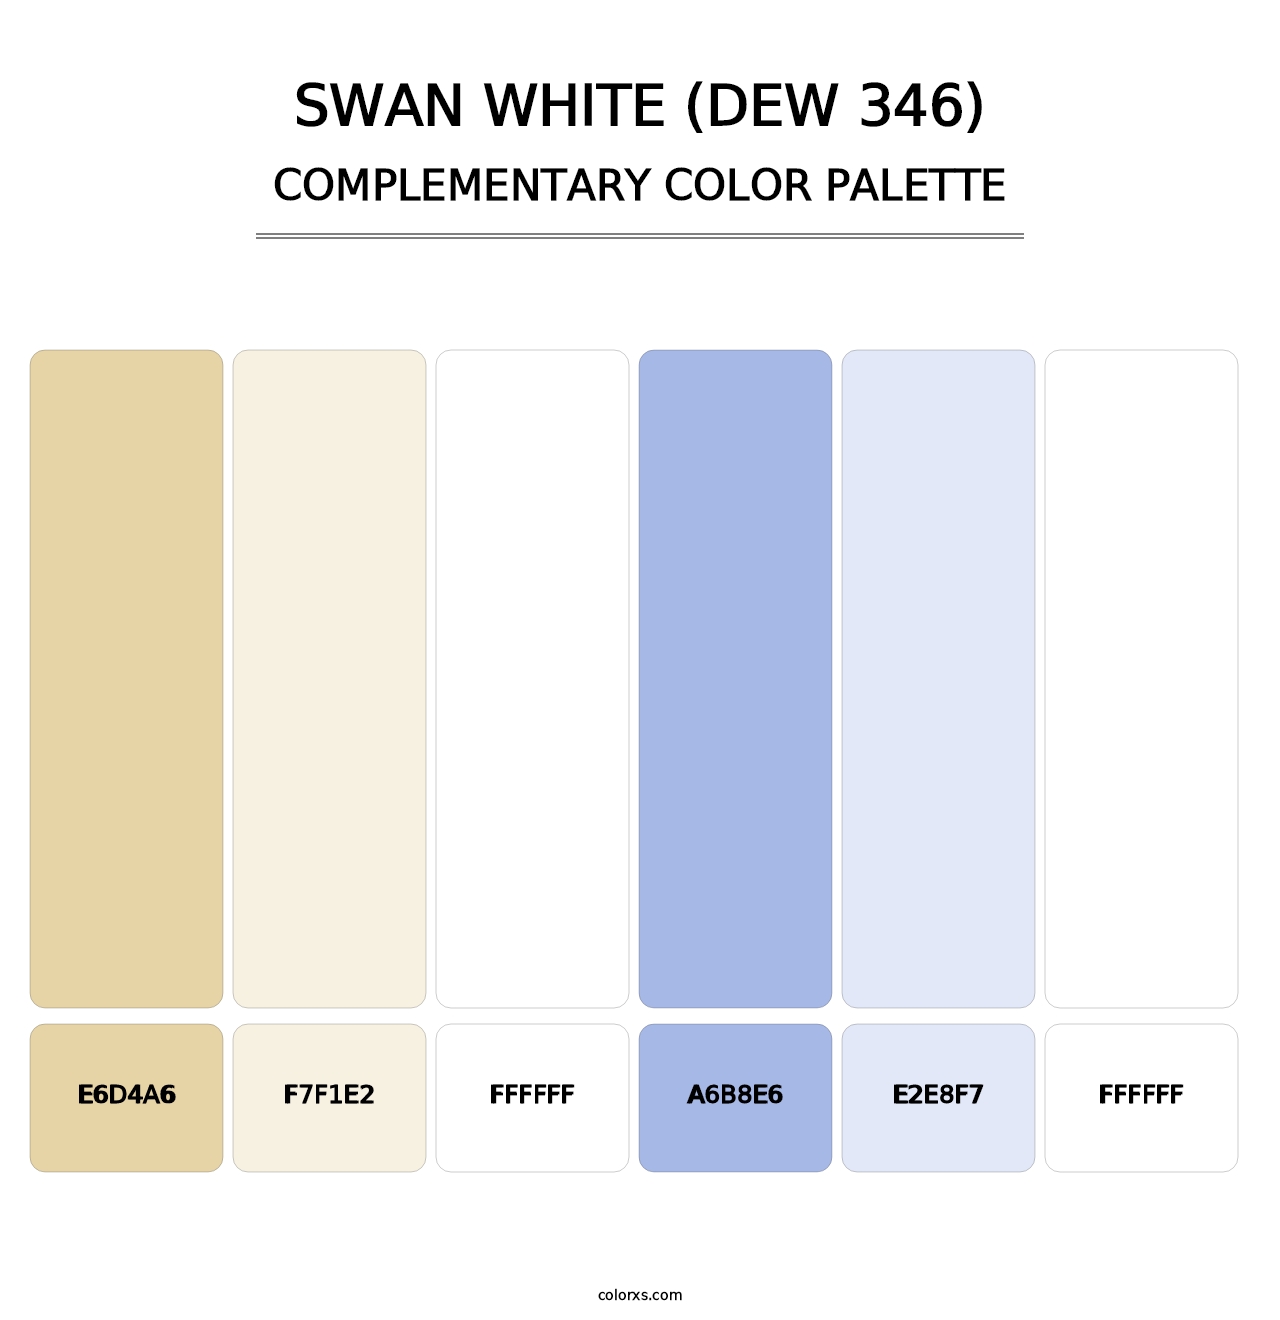 Swan White (DEW 346) - Complementary Color Palette